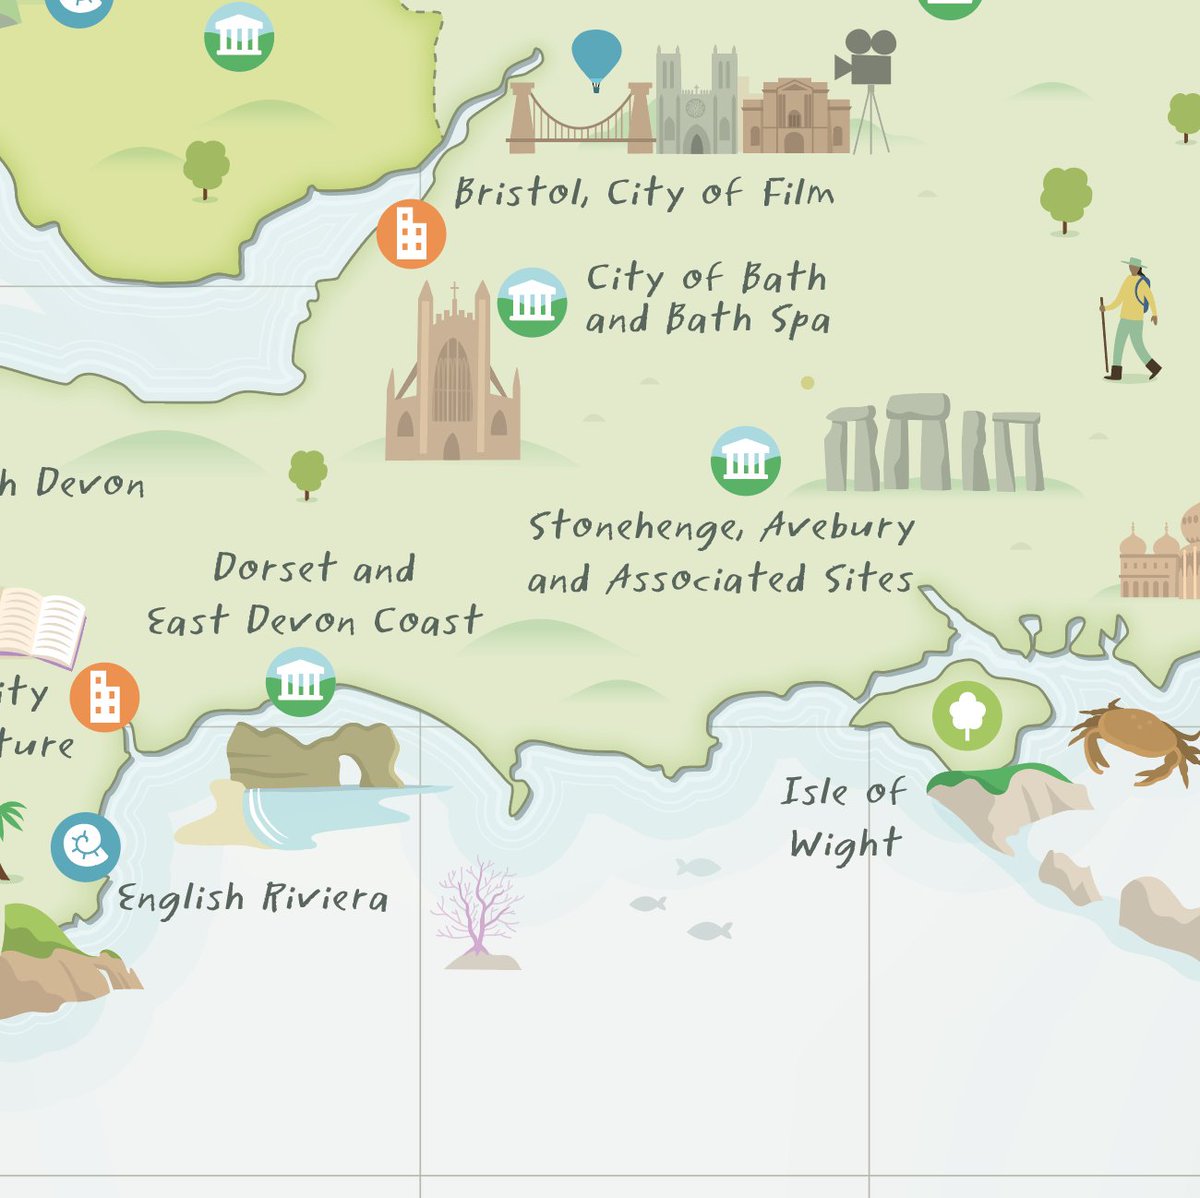 📣 Discover the new @UNESCOUK map, featuring Norwich #CityofLit!

From stunning coastlines to vibrant cities, you can explore all the unique UK #UNESCO sites. See if you can spot our fellow #CitiesofLit too!
Download your free copy: buff.ly/44VR7MX

#SeeThingsDifferently